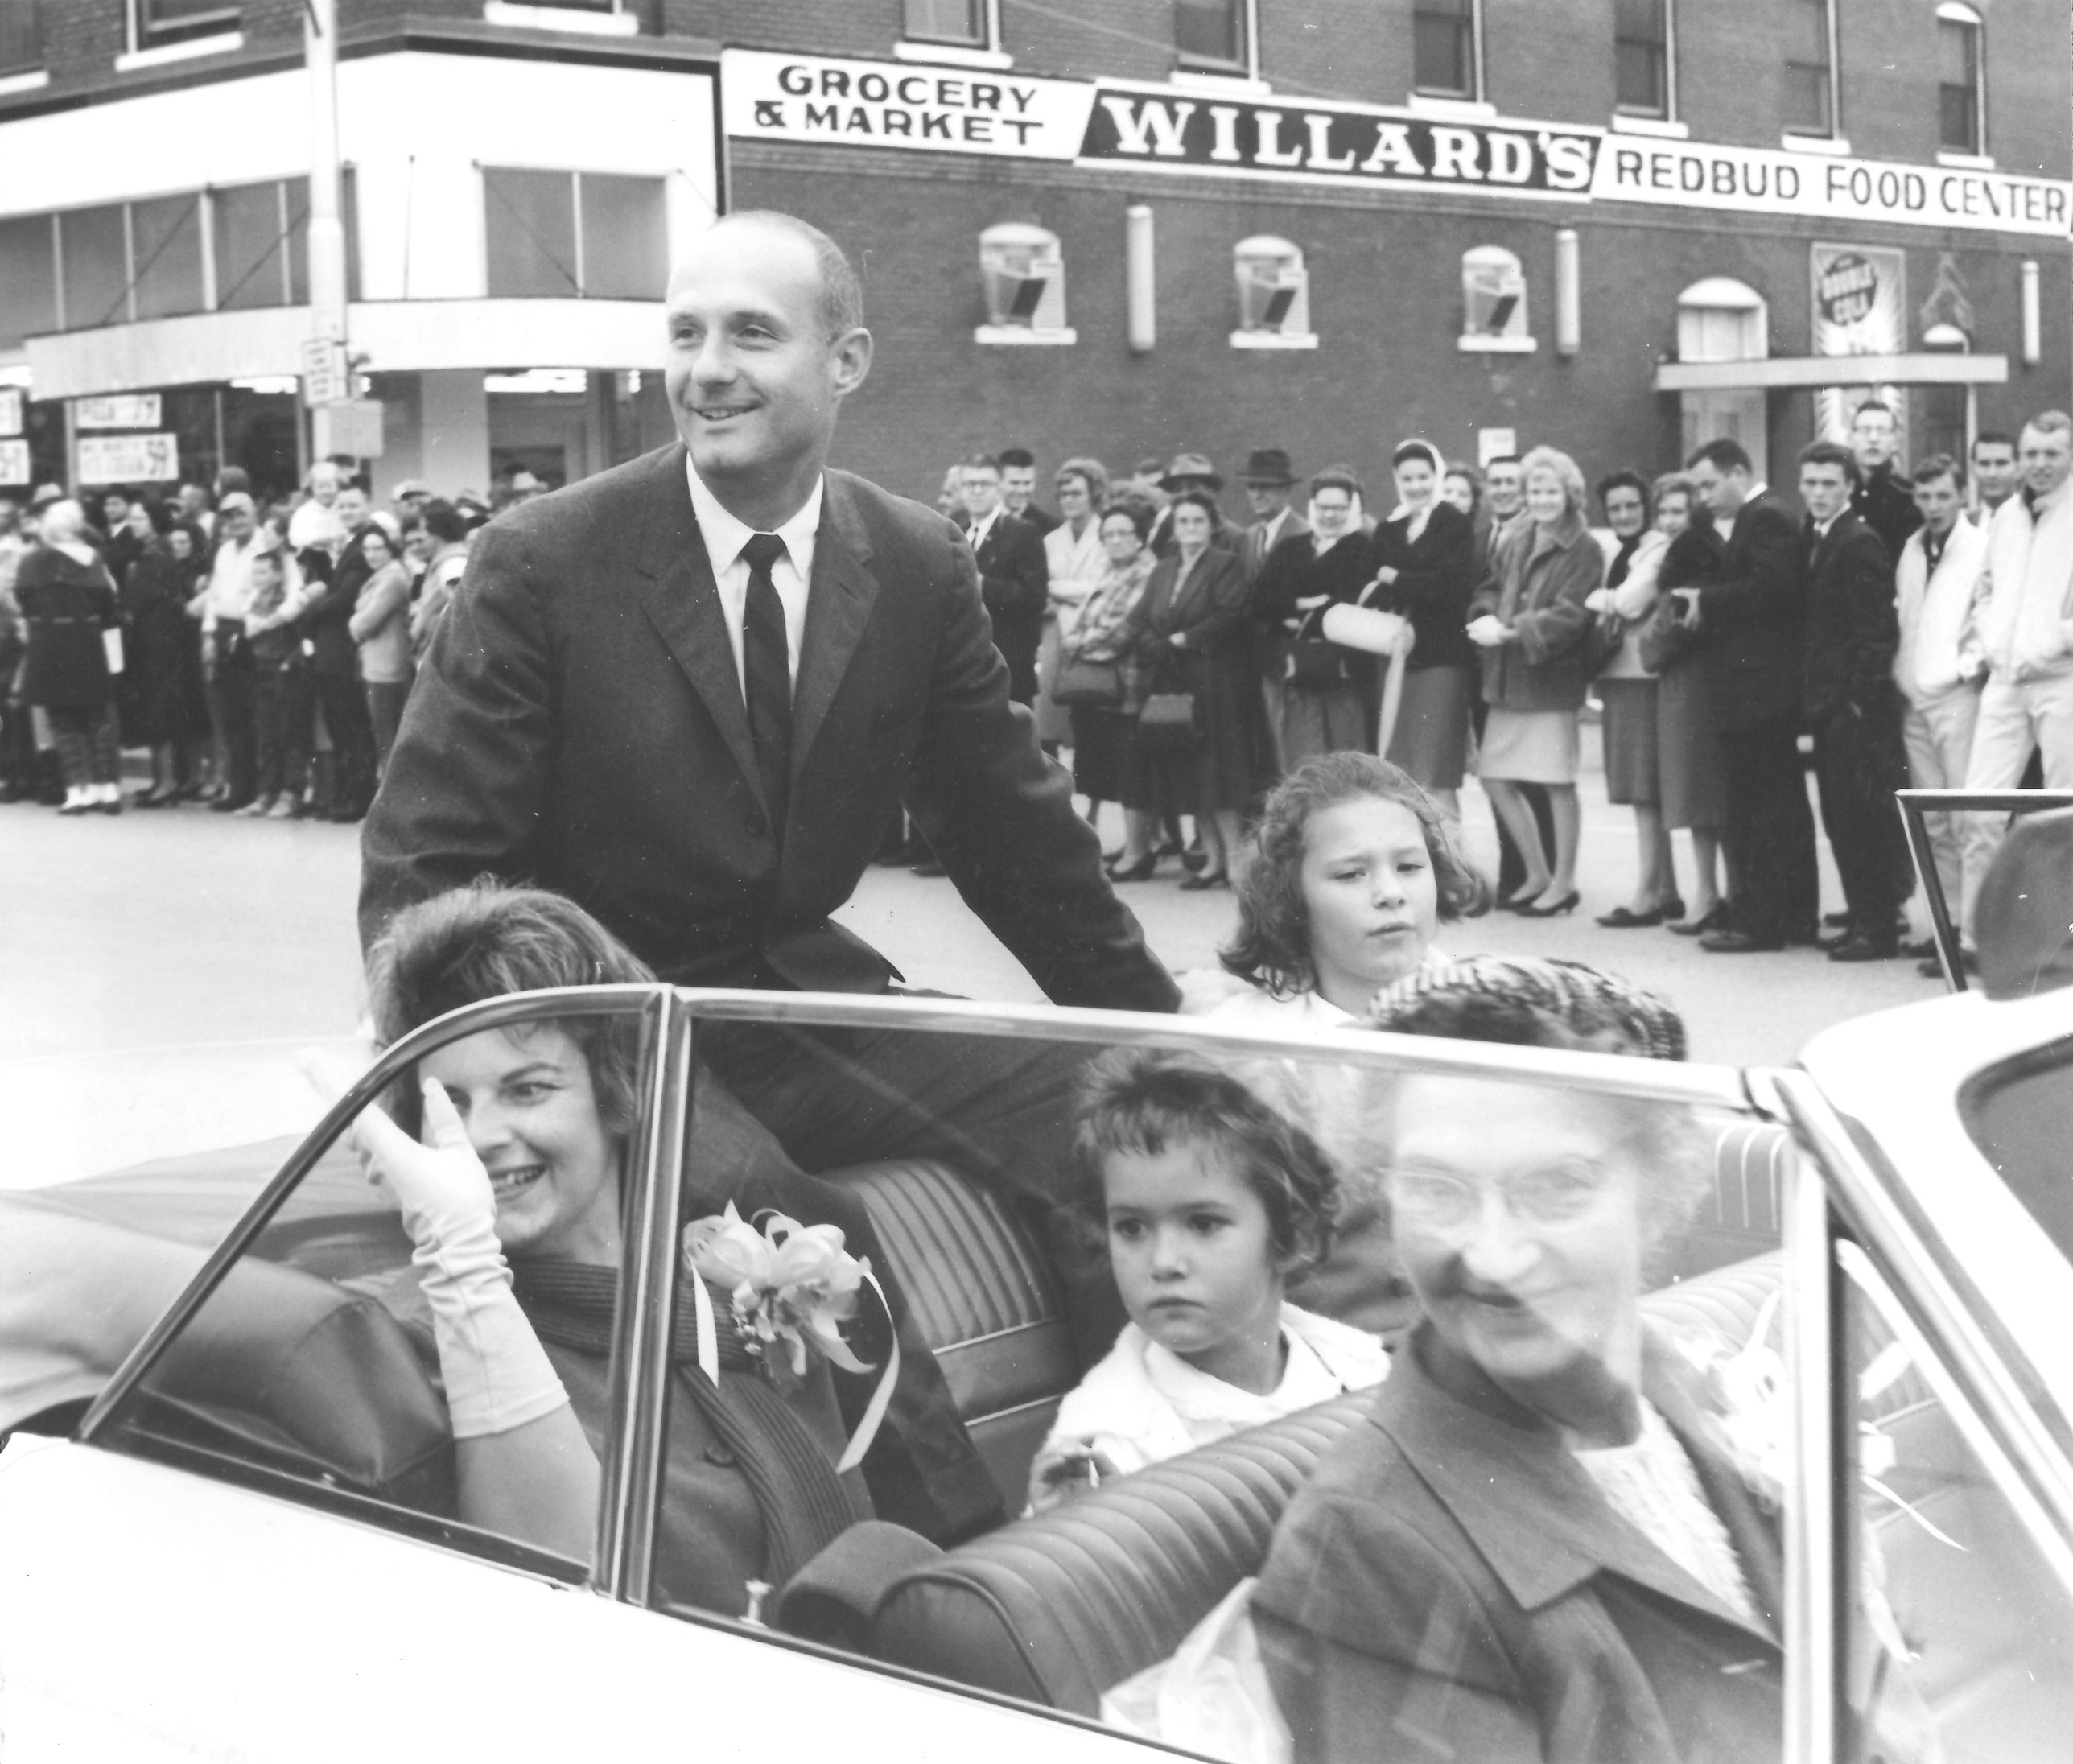 Stafford’s family participated in a Weatherford parade. Pictured from left are his wife Faye, Thomas Stafford, daughter Dionne, daughter Karin and mother Mary in the front seat.